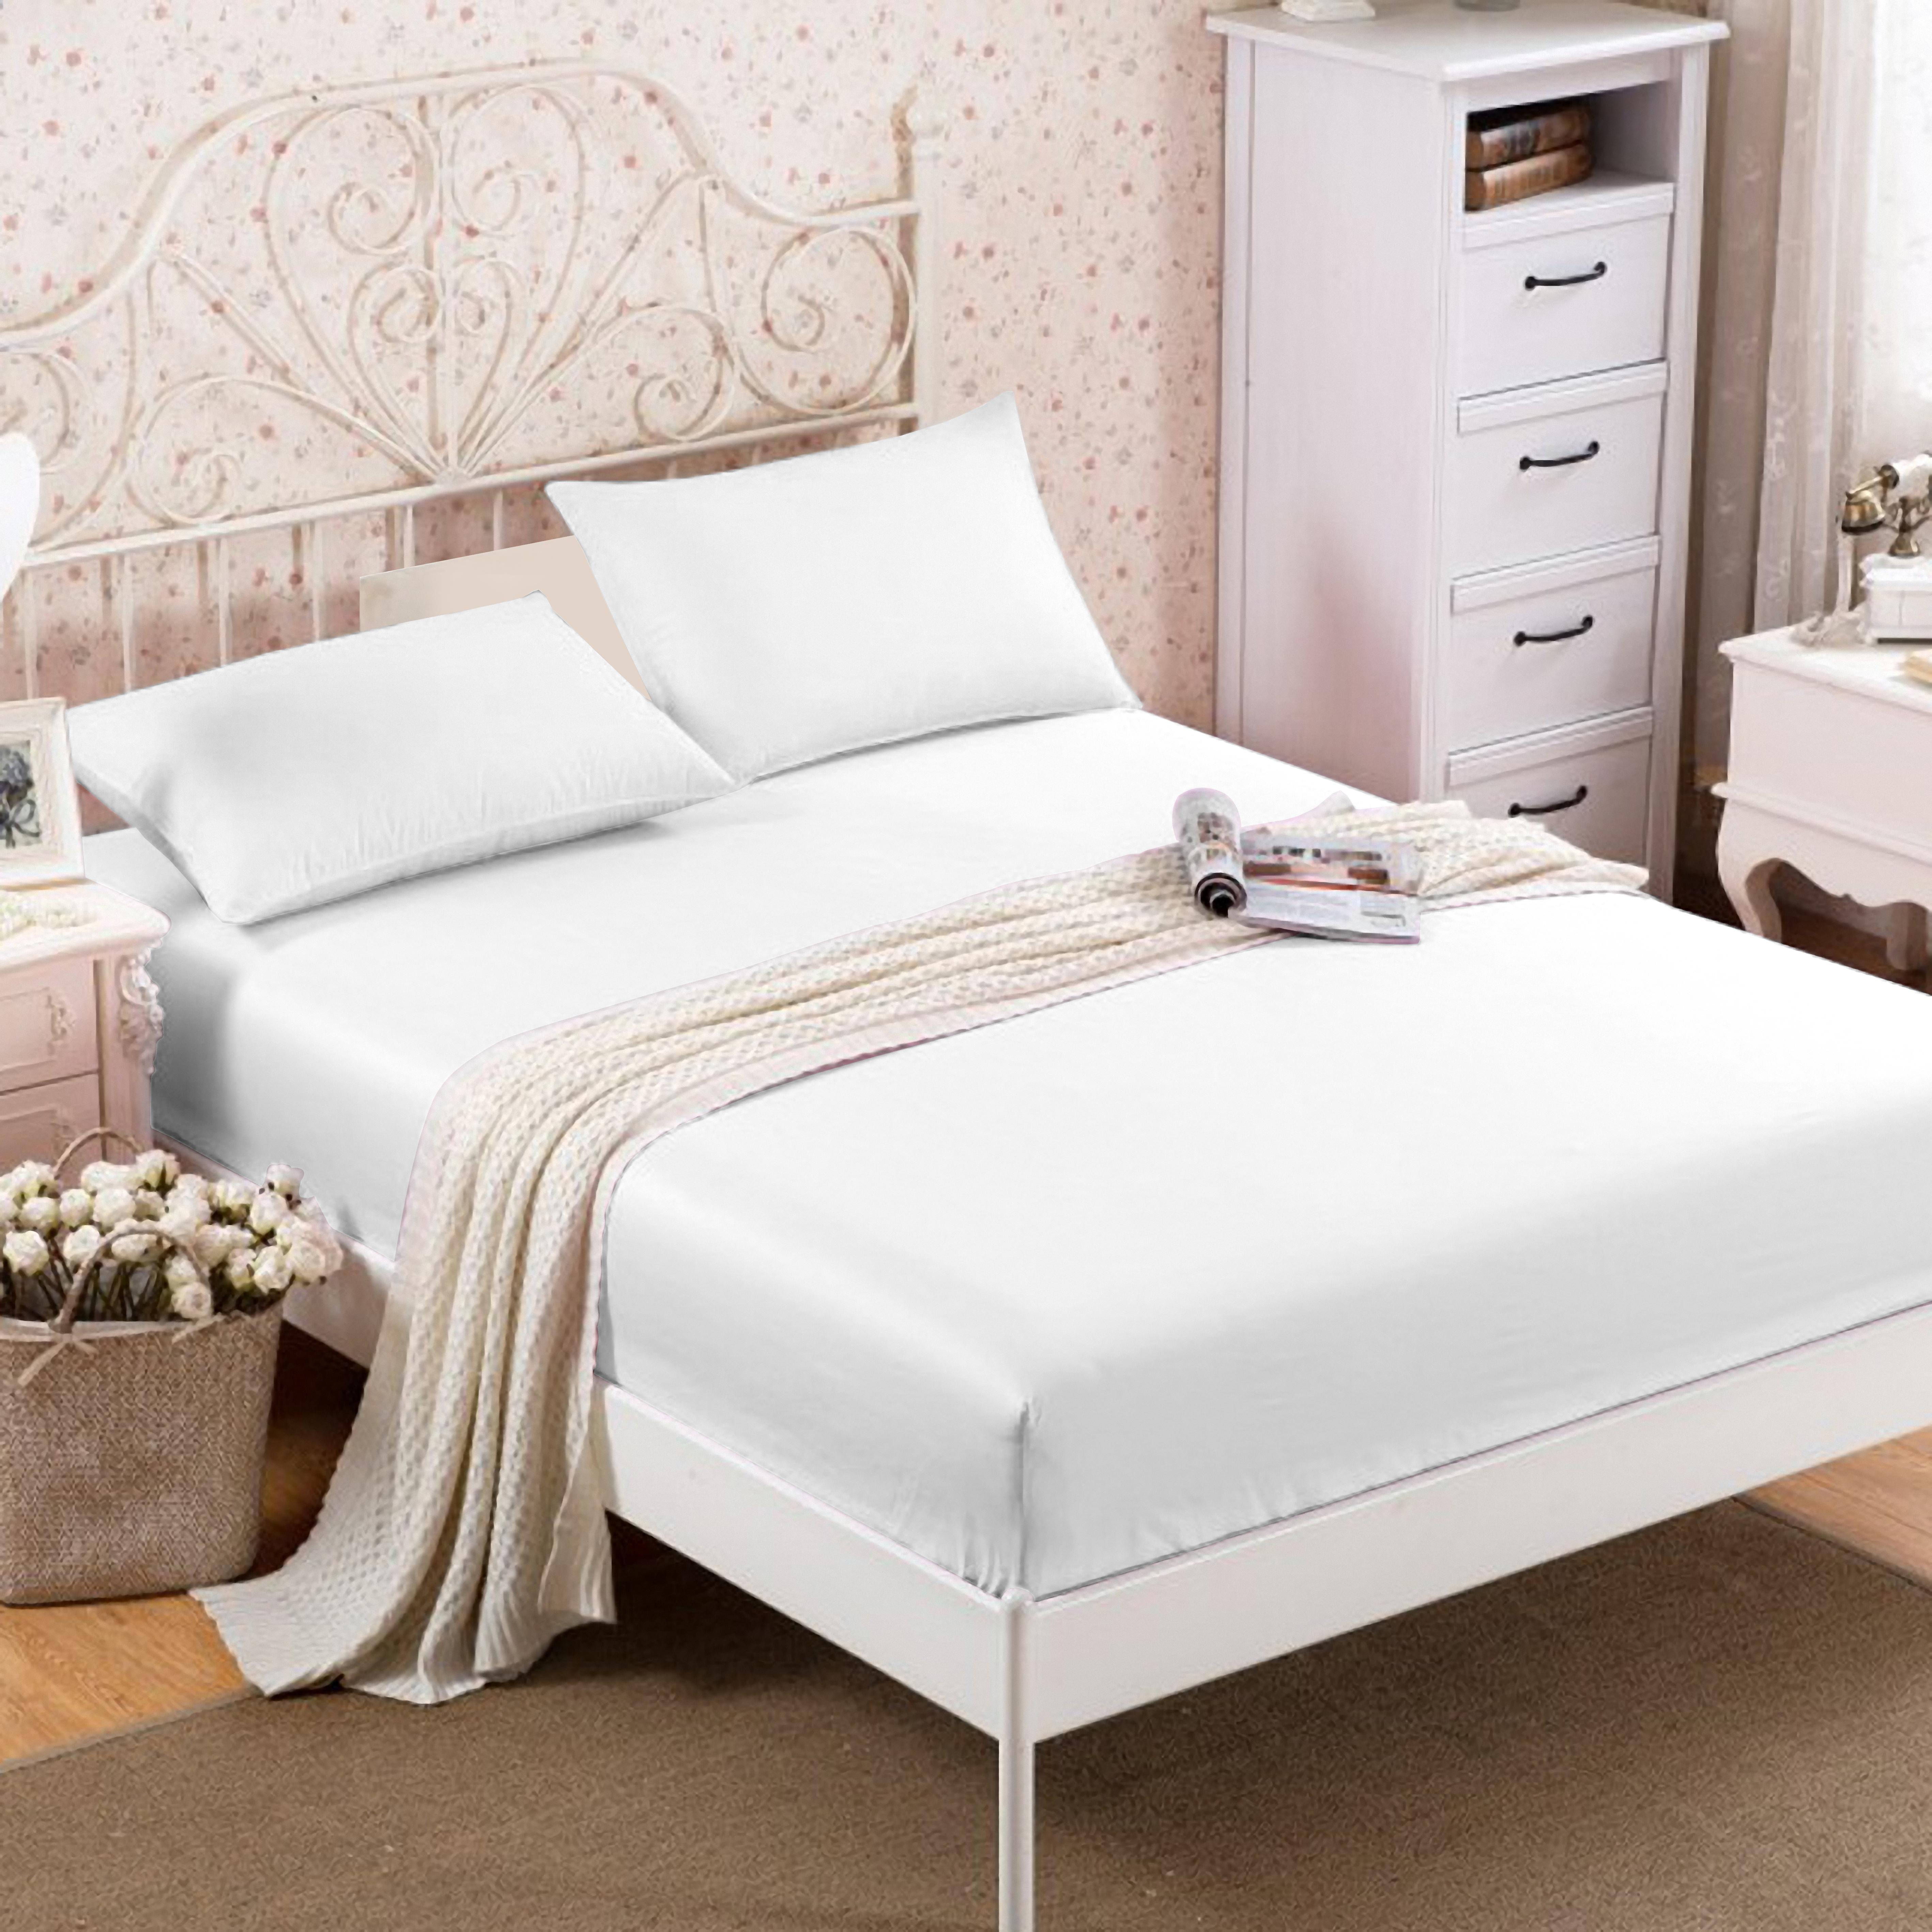 High Quality Comfortable Bed Sheets